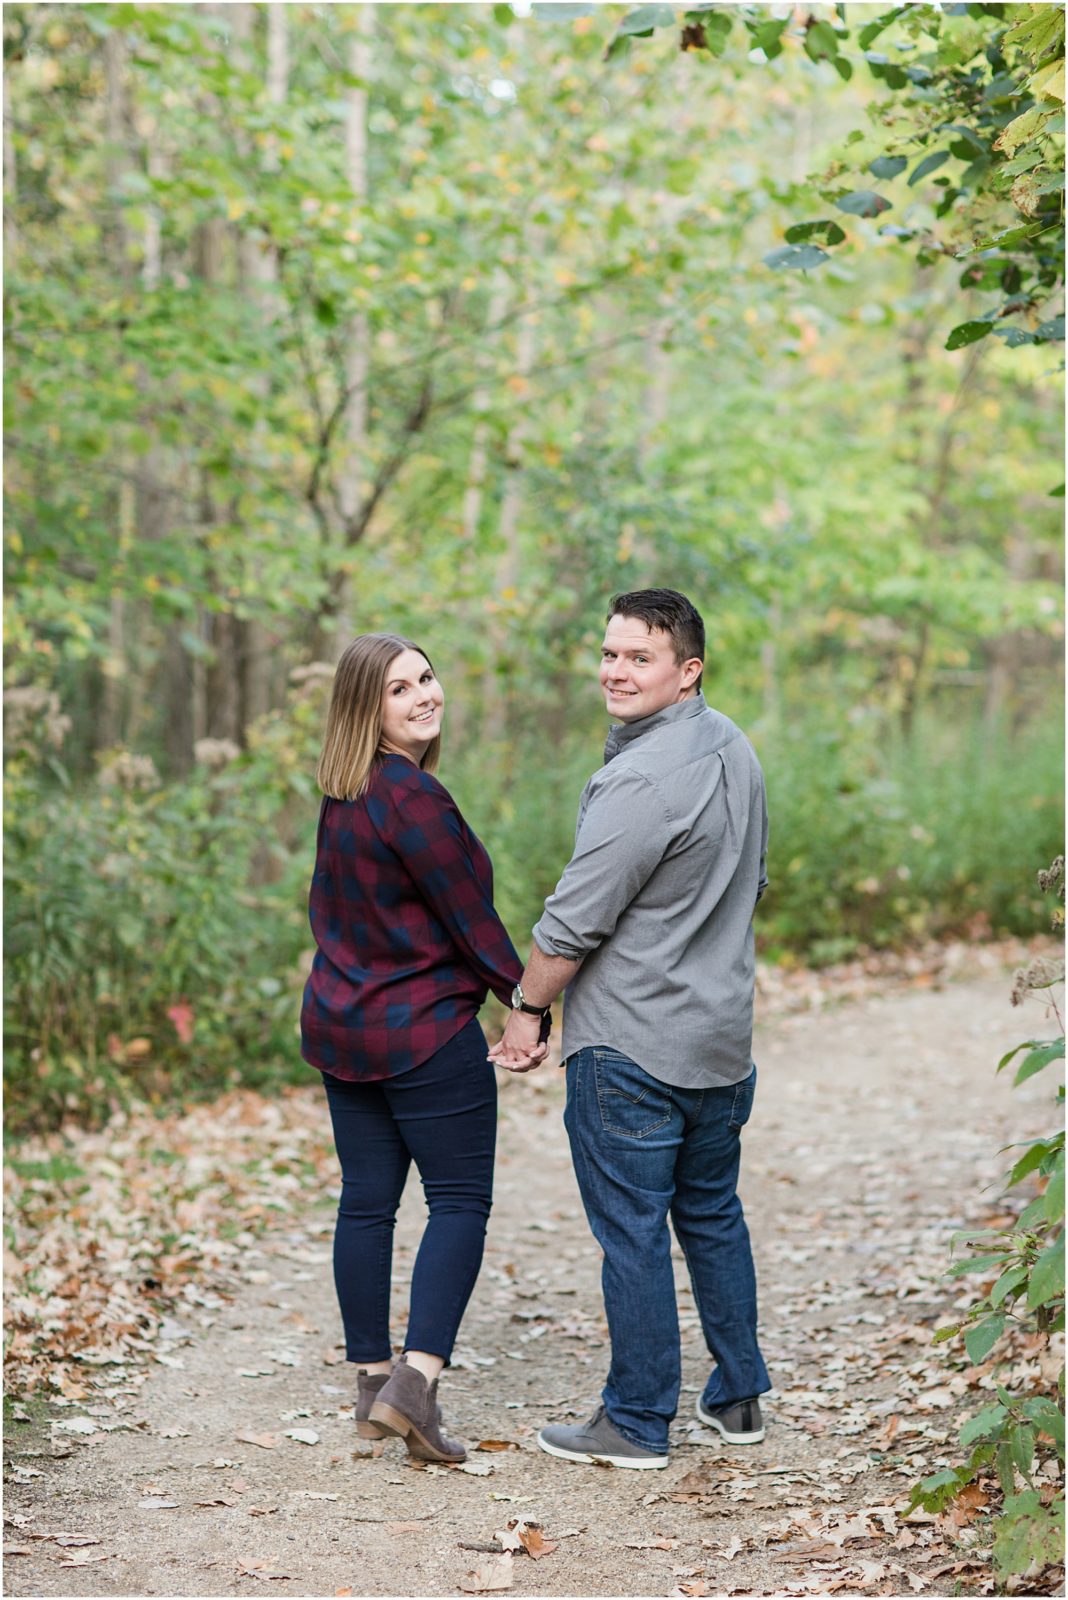 An October Engagement at The Grove: Nicole & Michael - Showit Blog